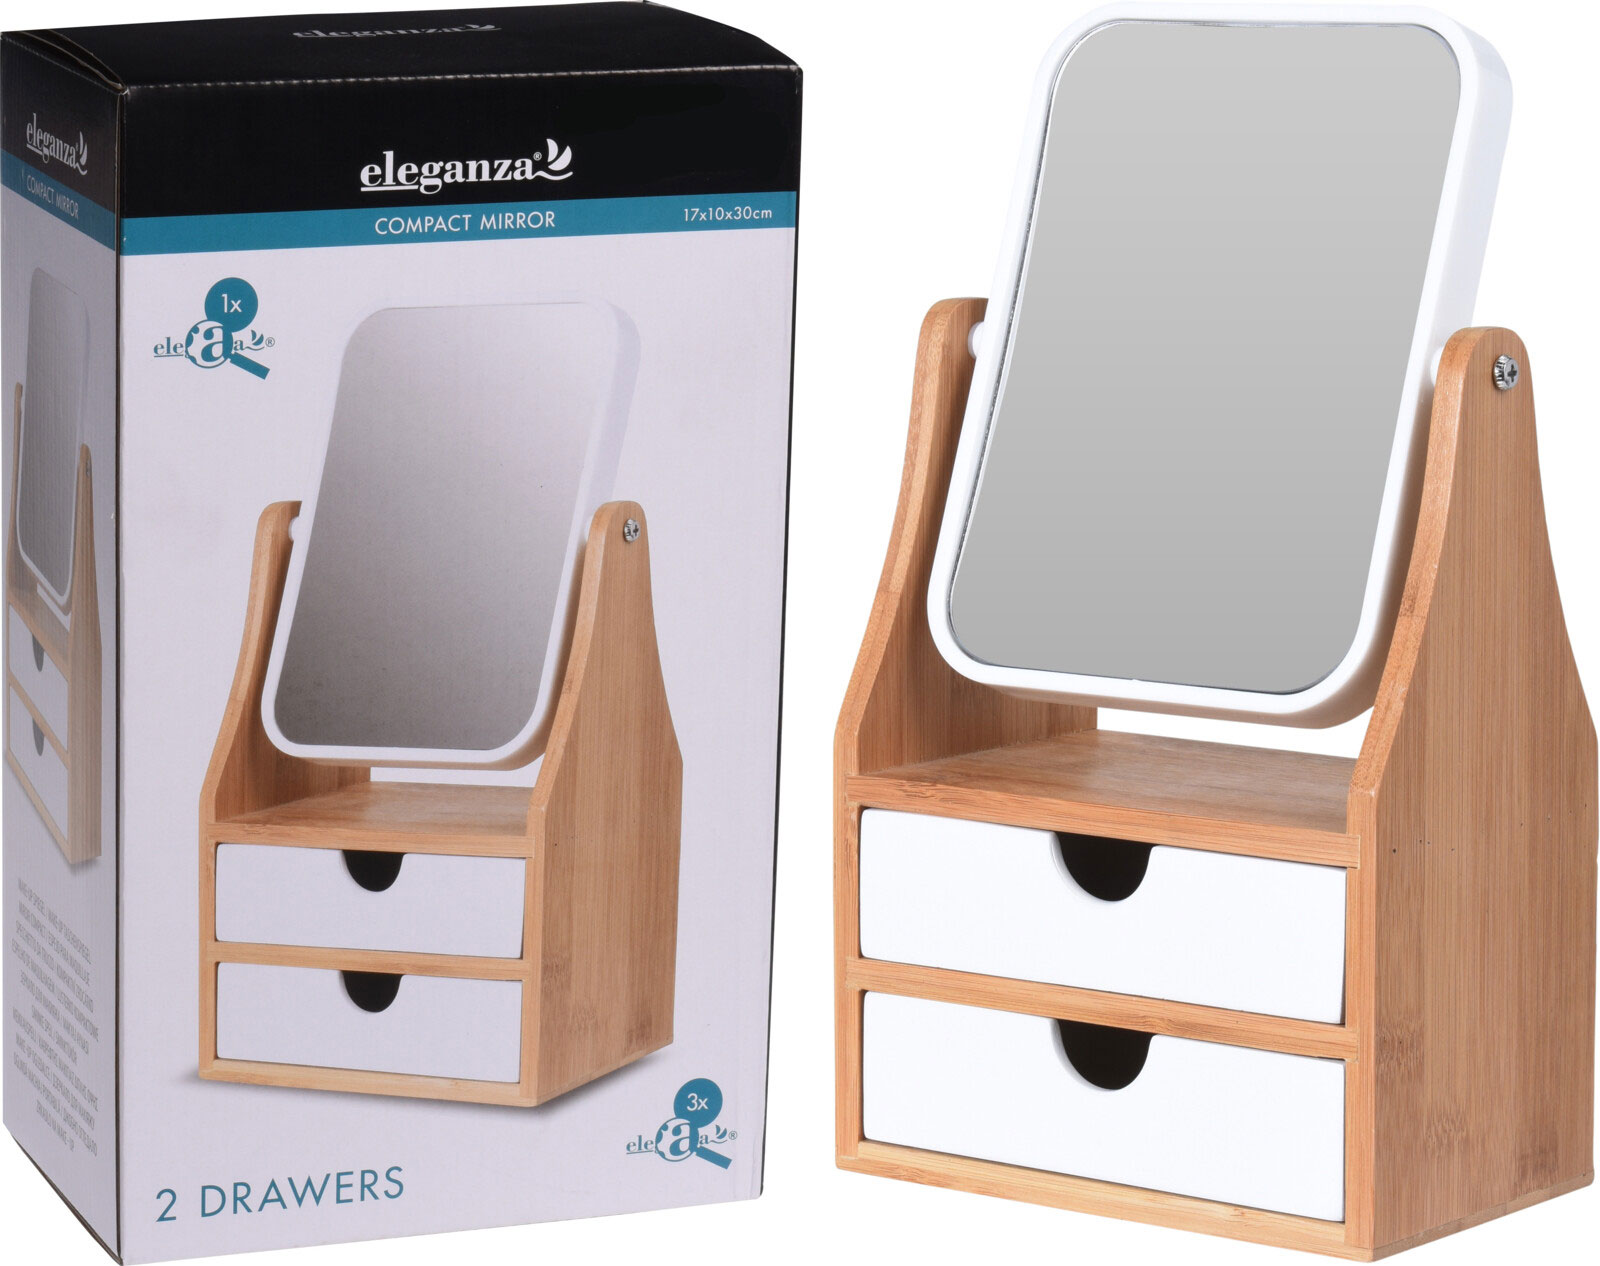 MAKE UP MIRROR STAND WITH 2 DRAWERS 17X10X30CM